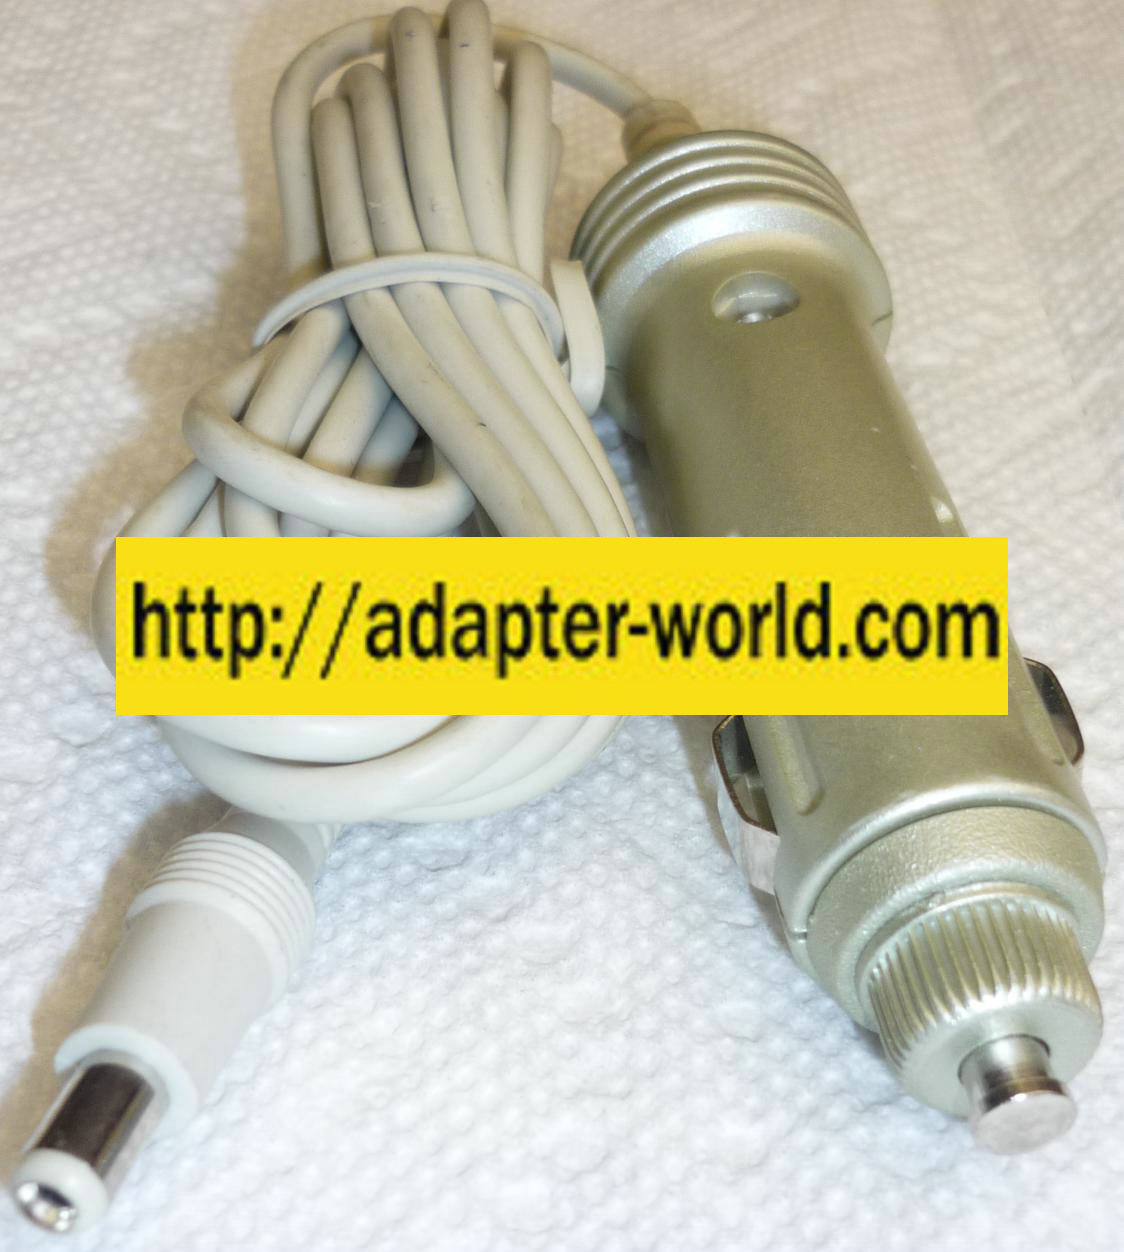 CAR POWER ADAPTER ROUND BARREL 3x5.5mm NEW POWER S - Click Image to Close